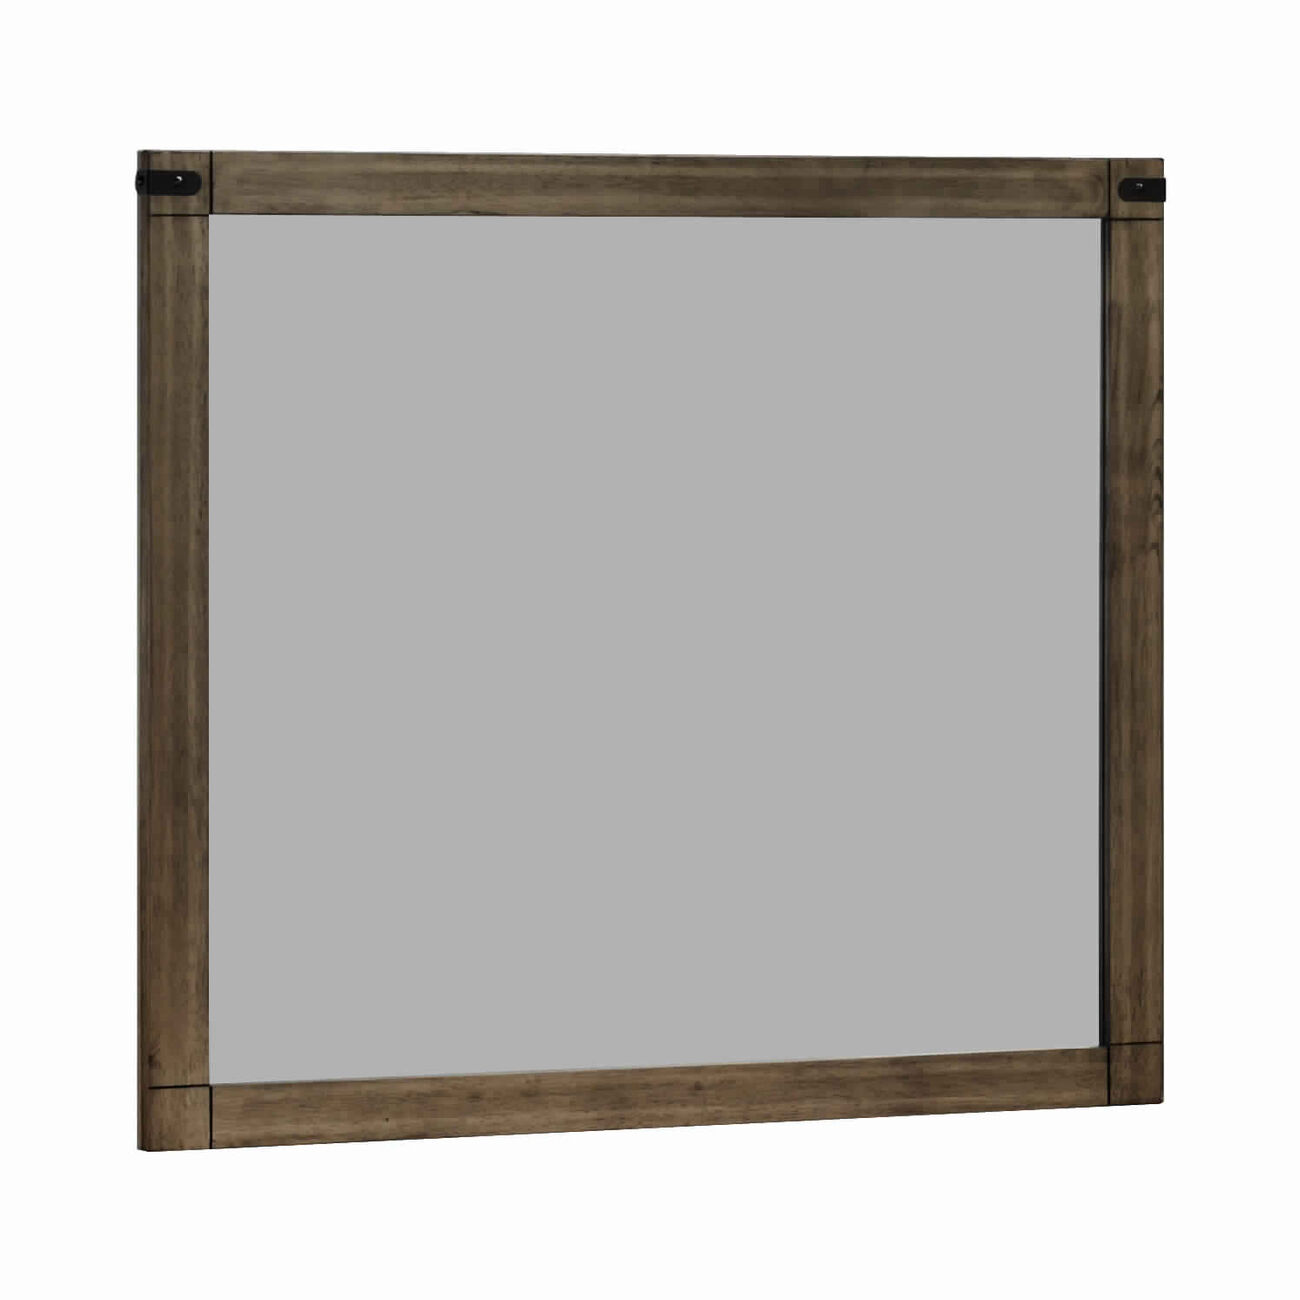 Wooden Frame Dresser Top Mirror with Metal Brackets, Brown and Silver - BM220546